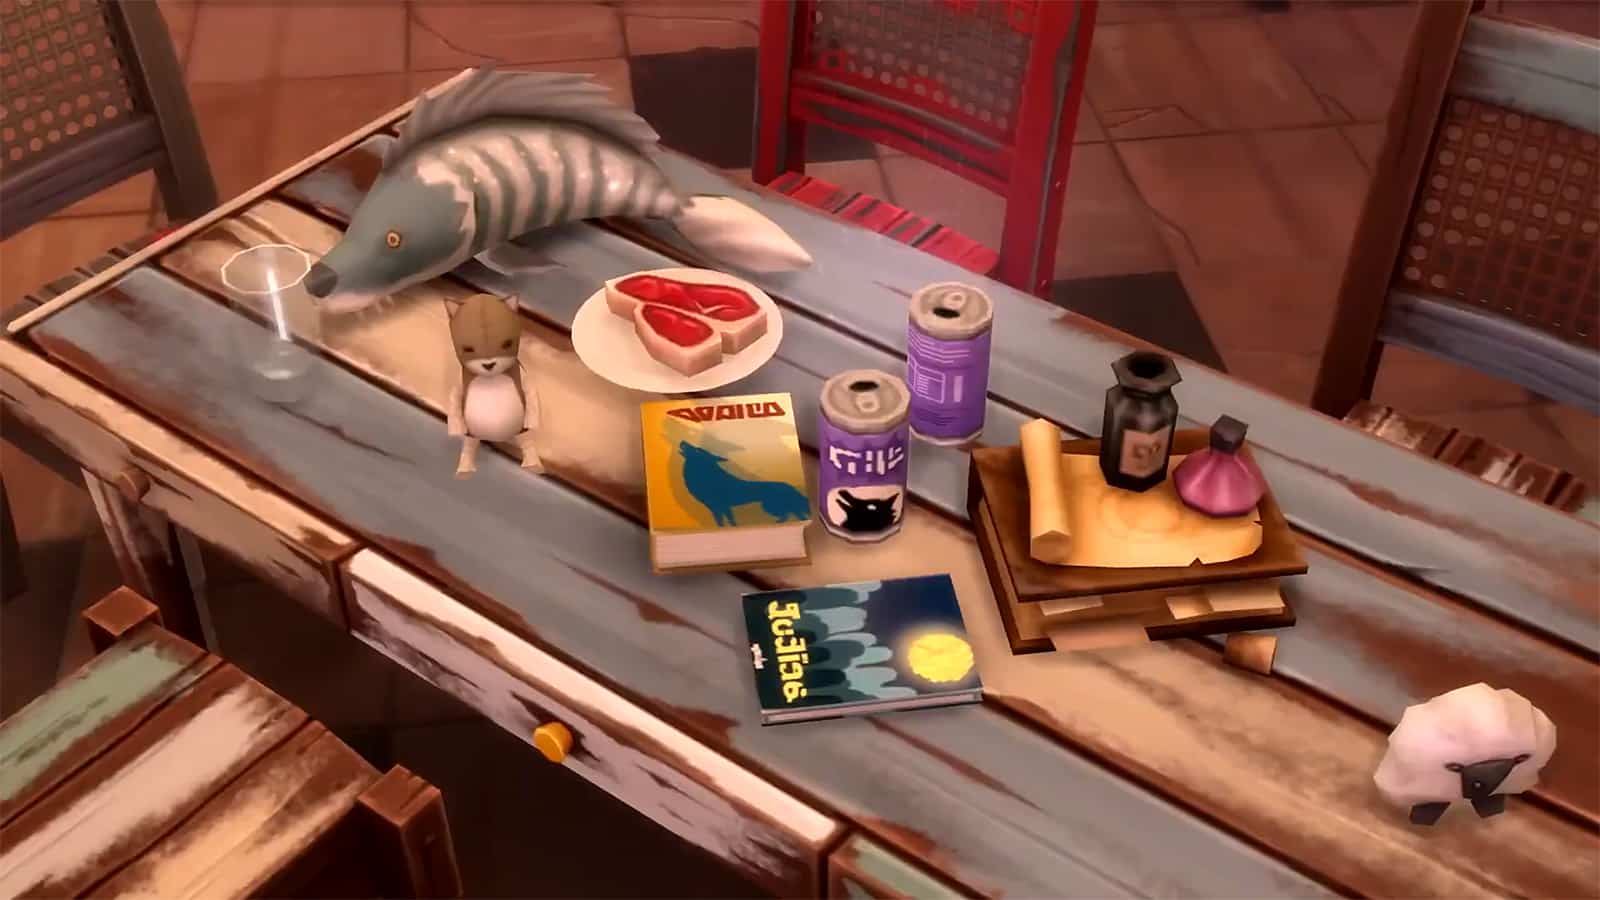 A table in The Sims 4 with items on it